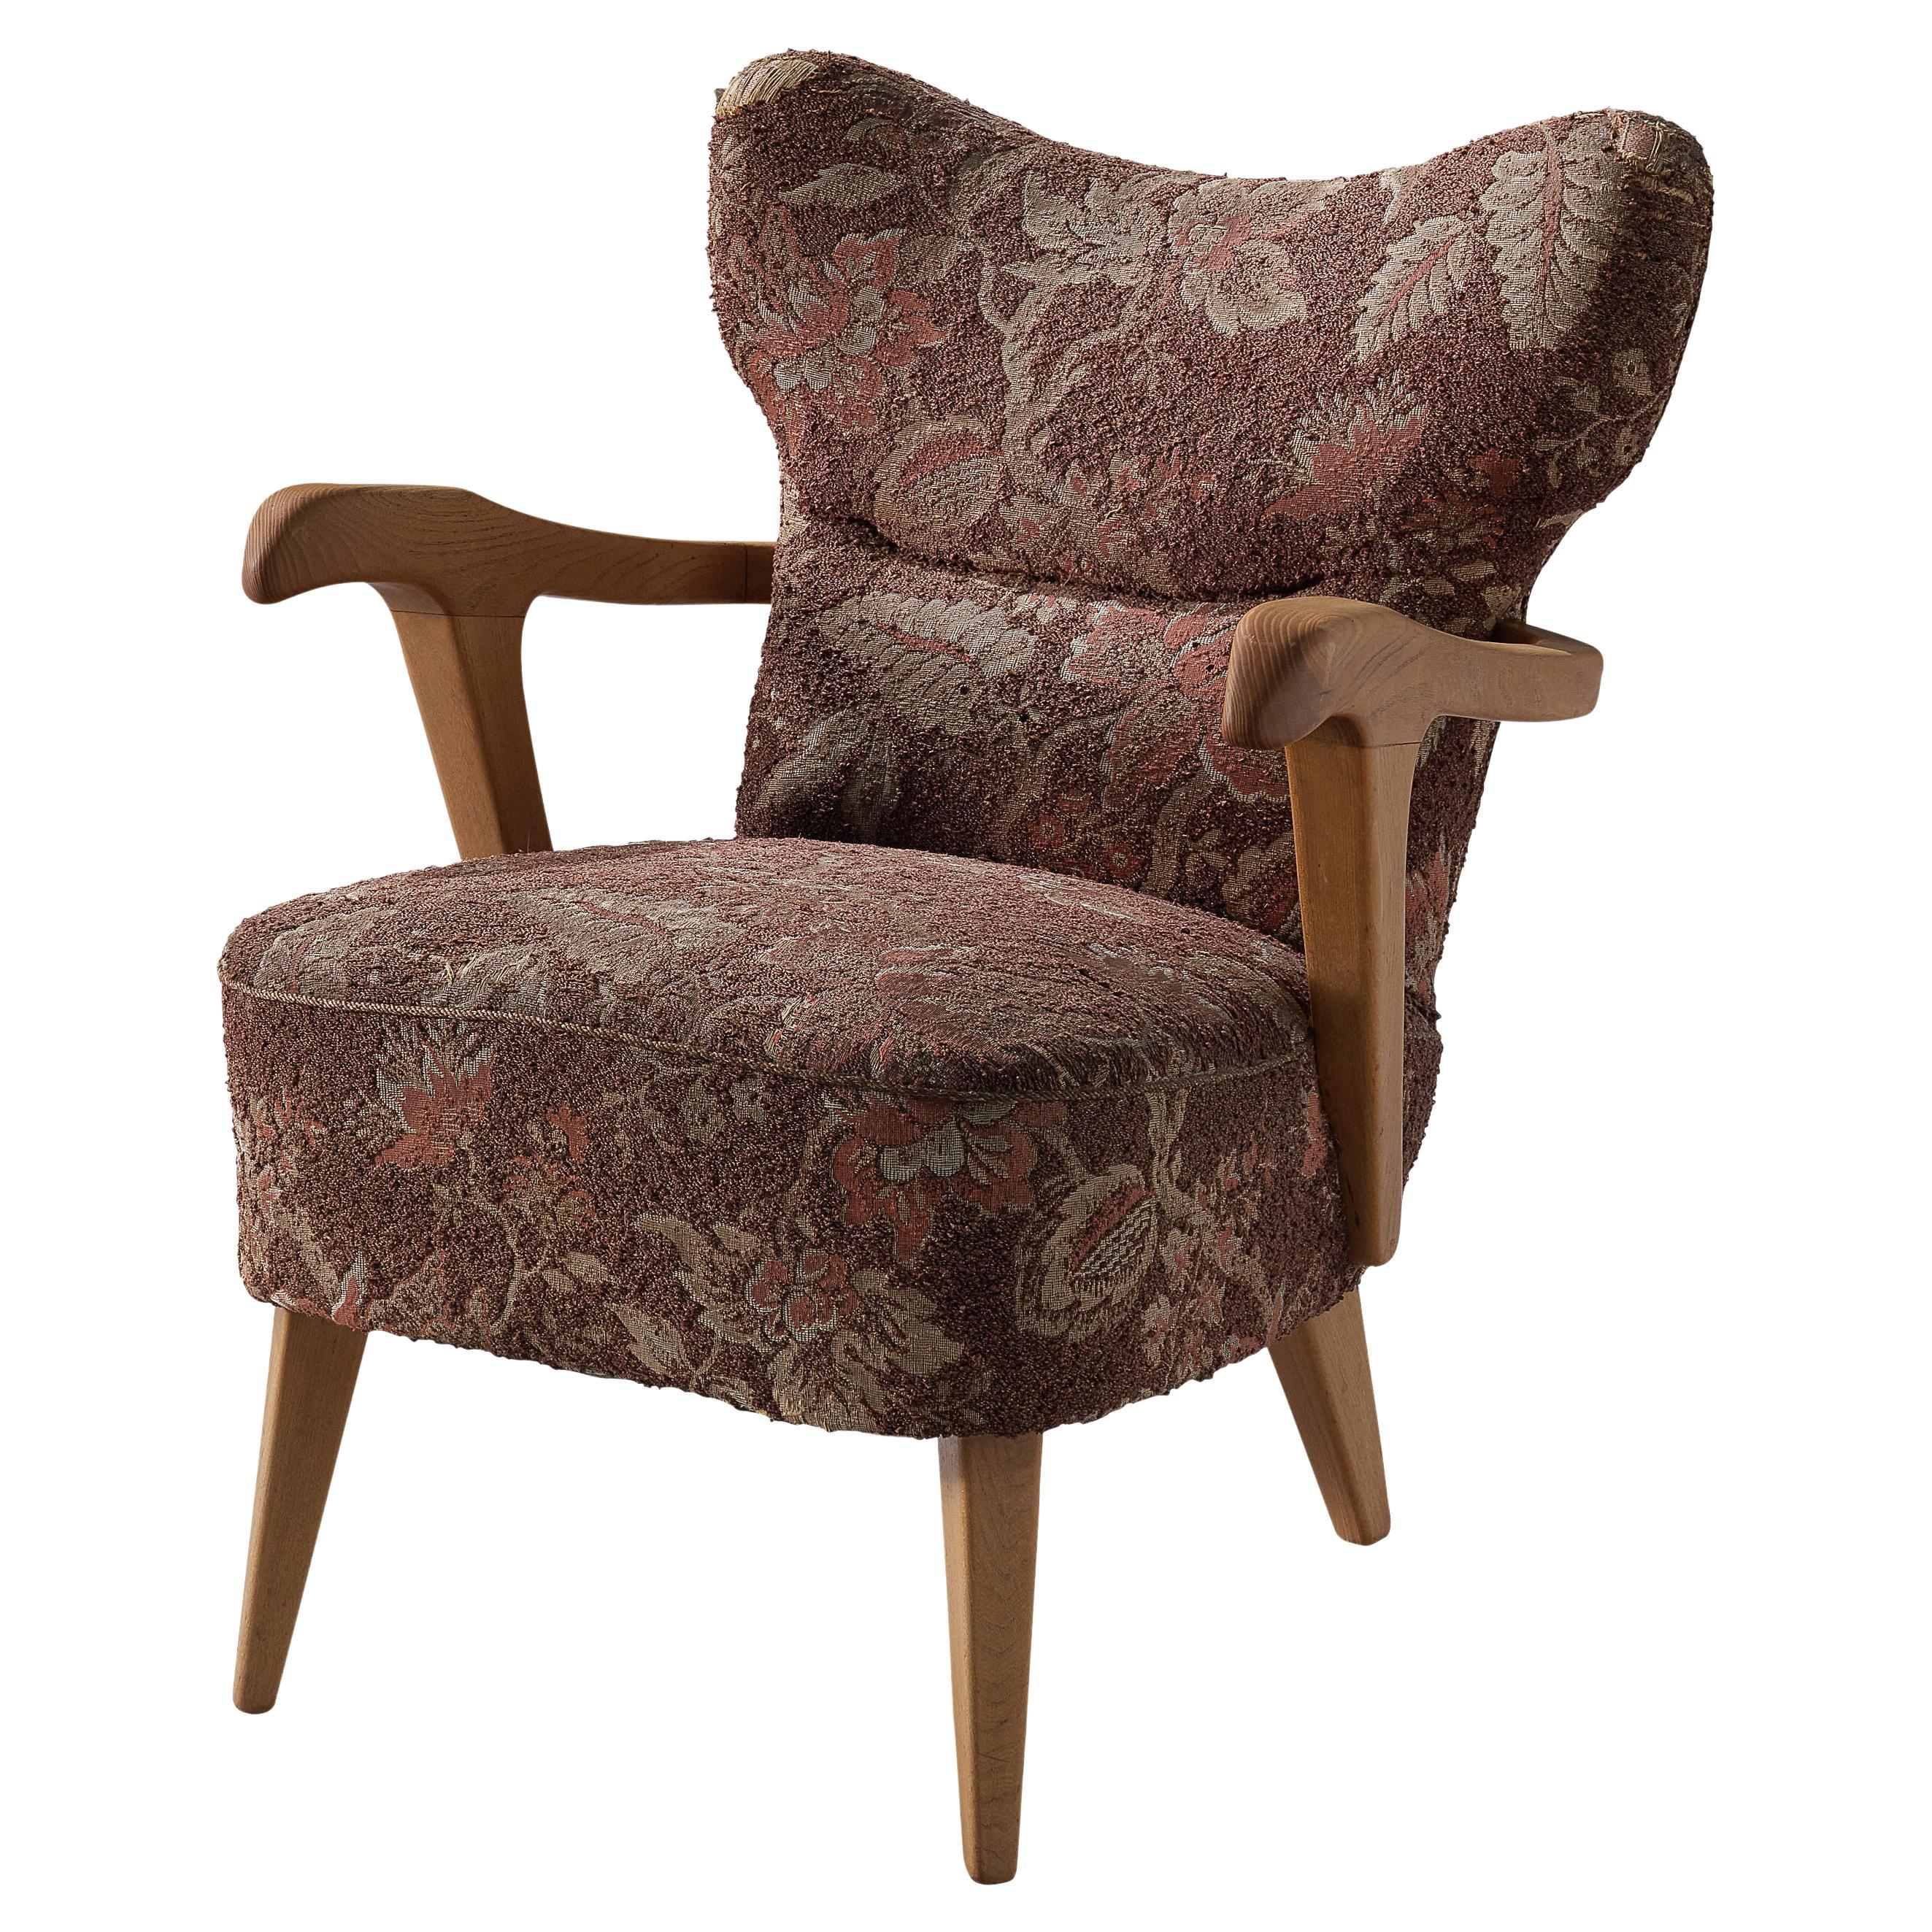 Sculptural Italian Lounge Chair in Oak and Floral Upholstery